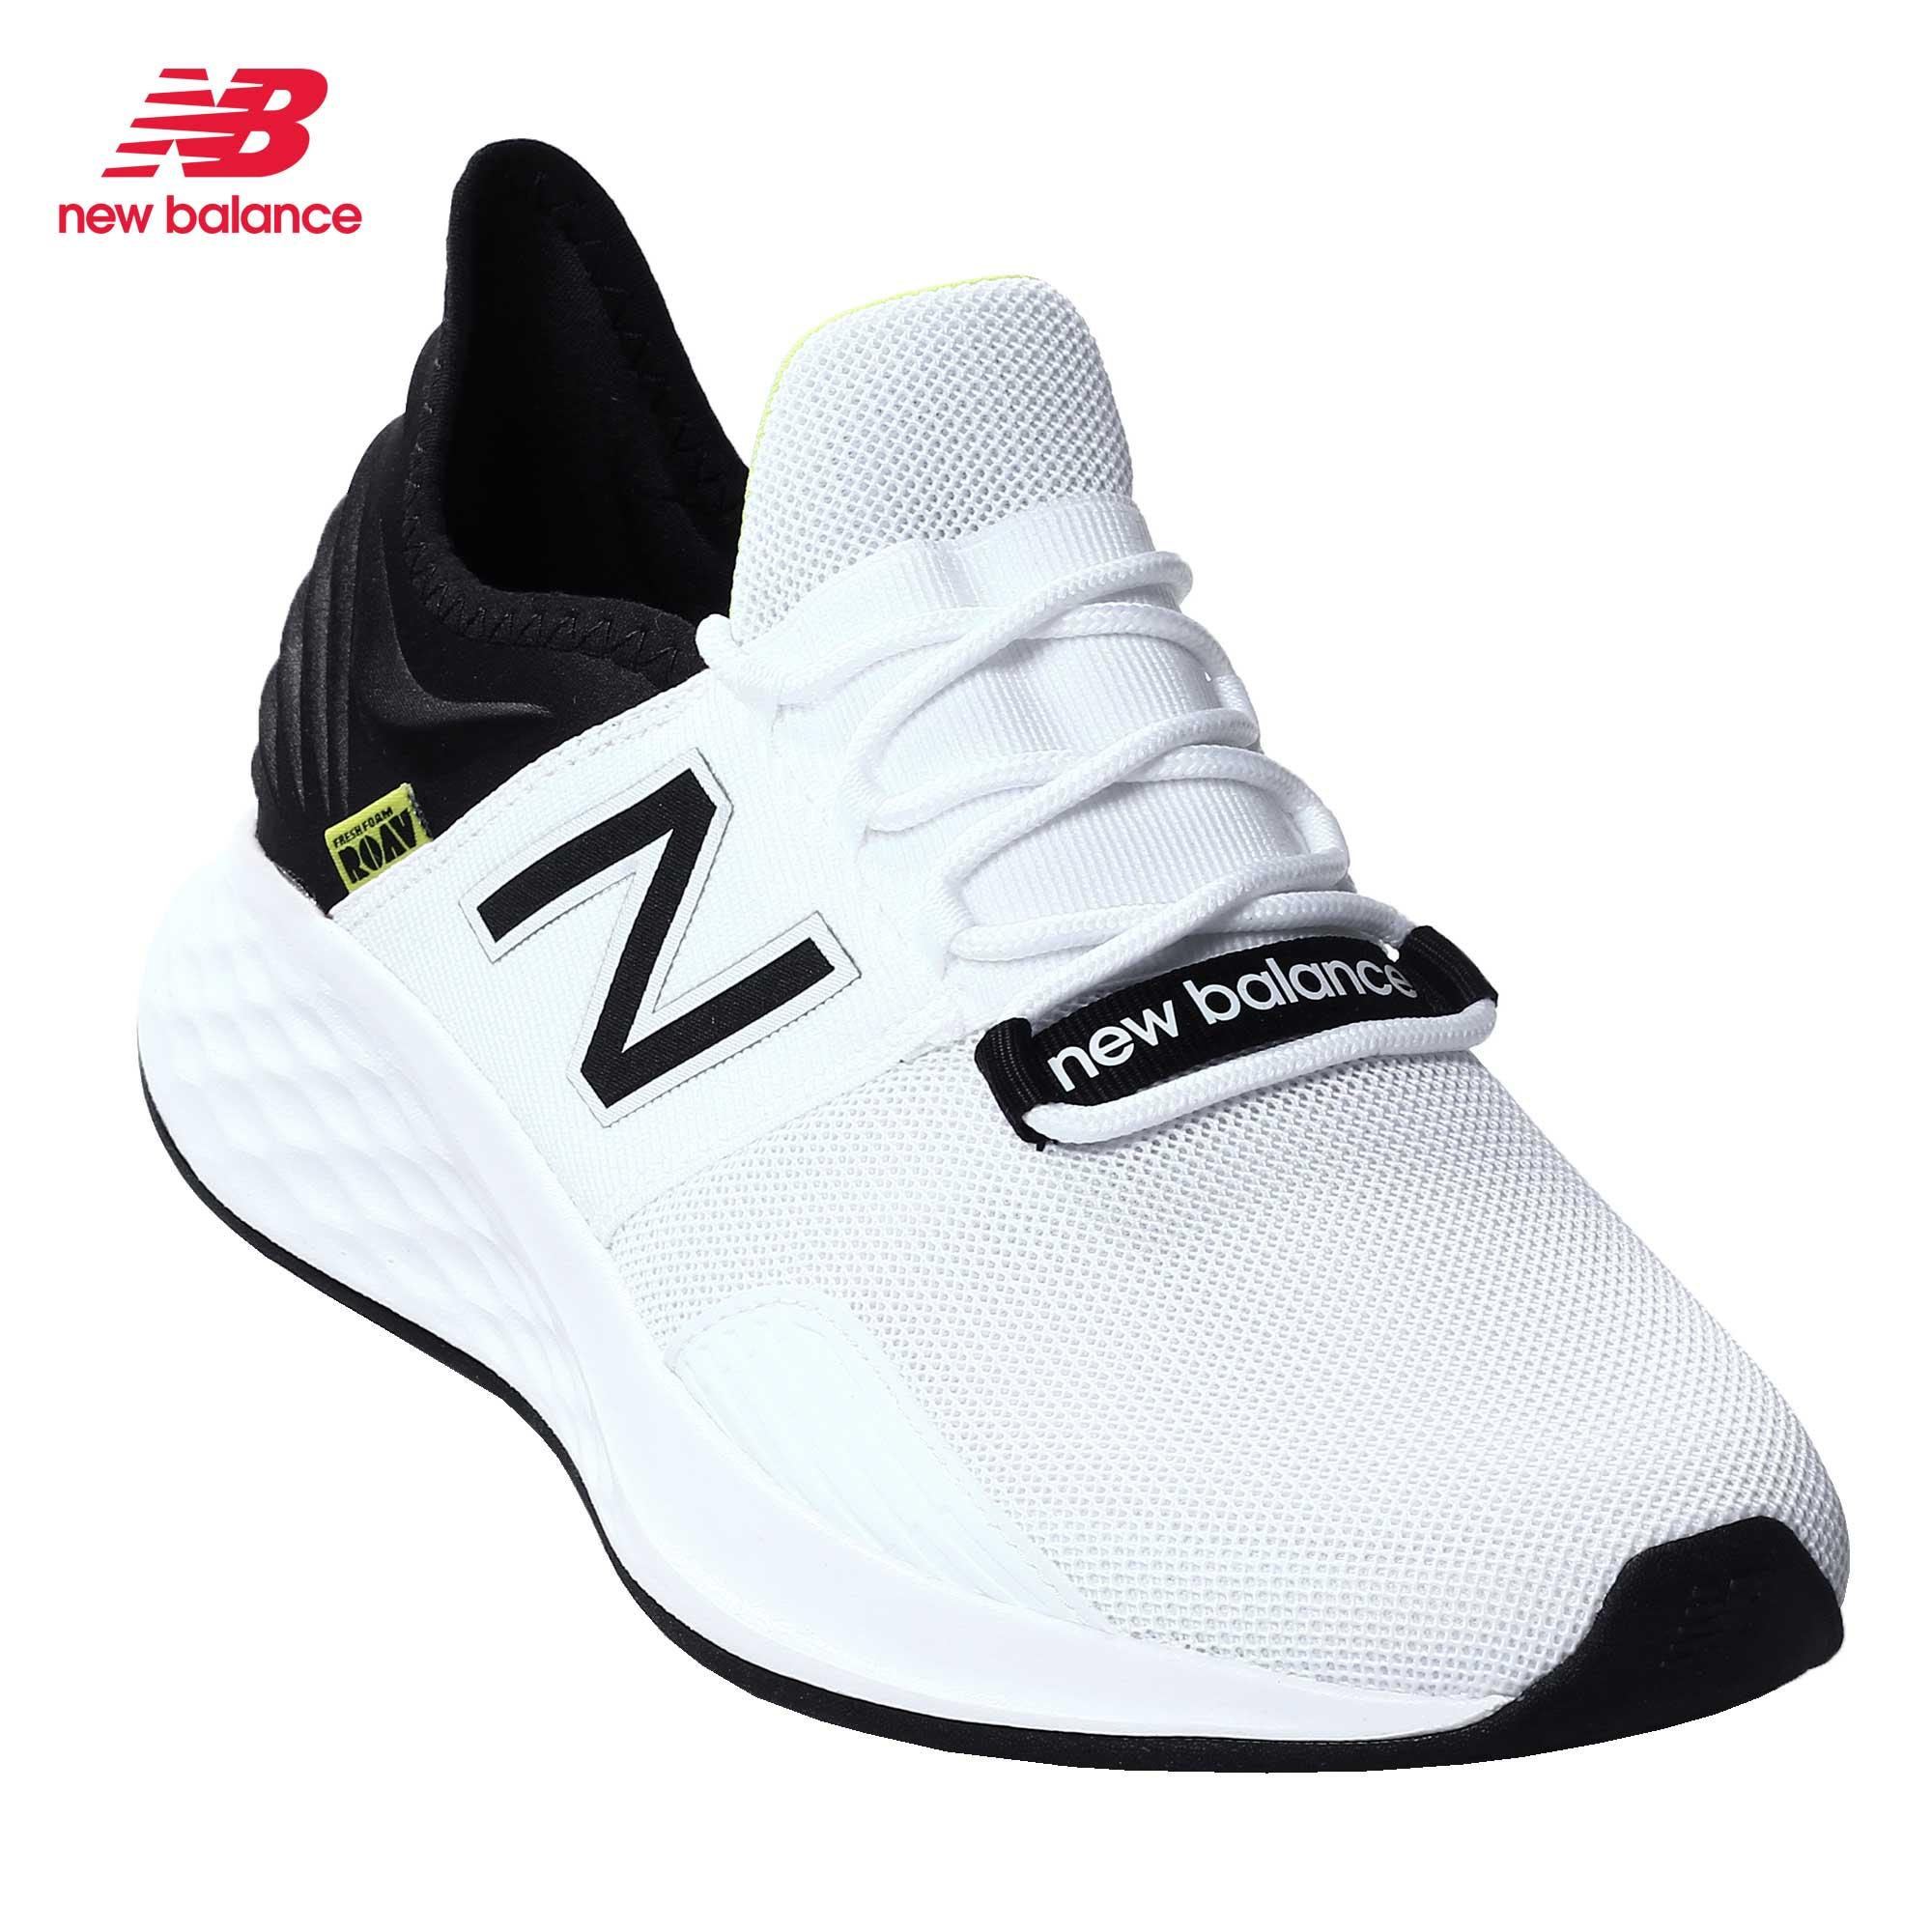 for sale new balance shoes in philippines